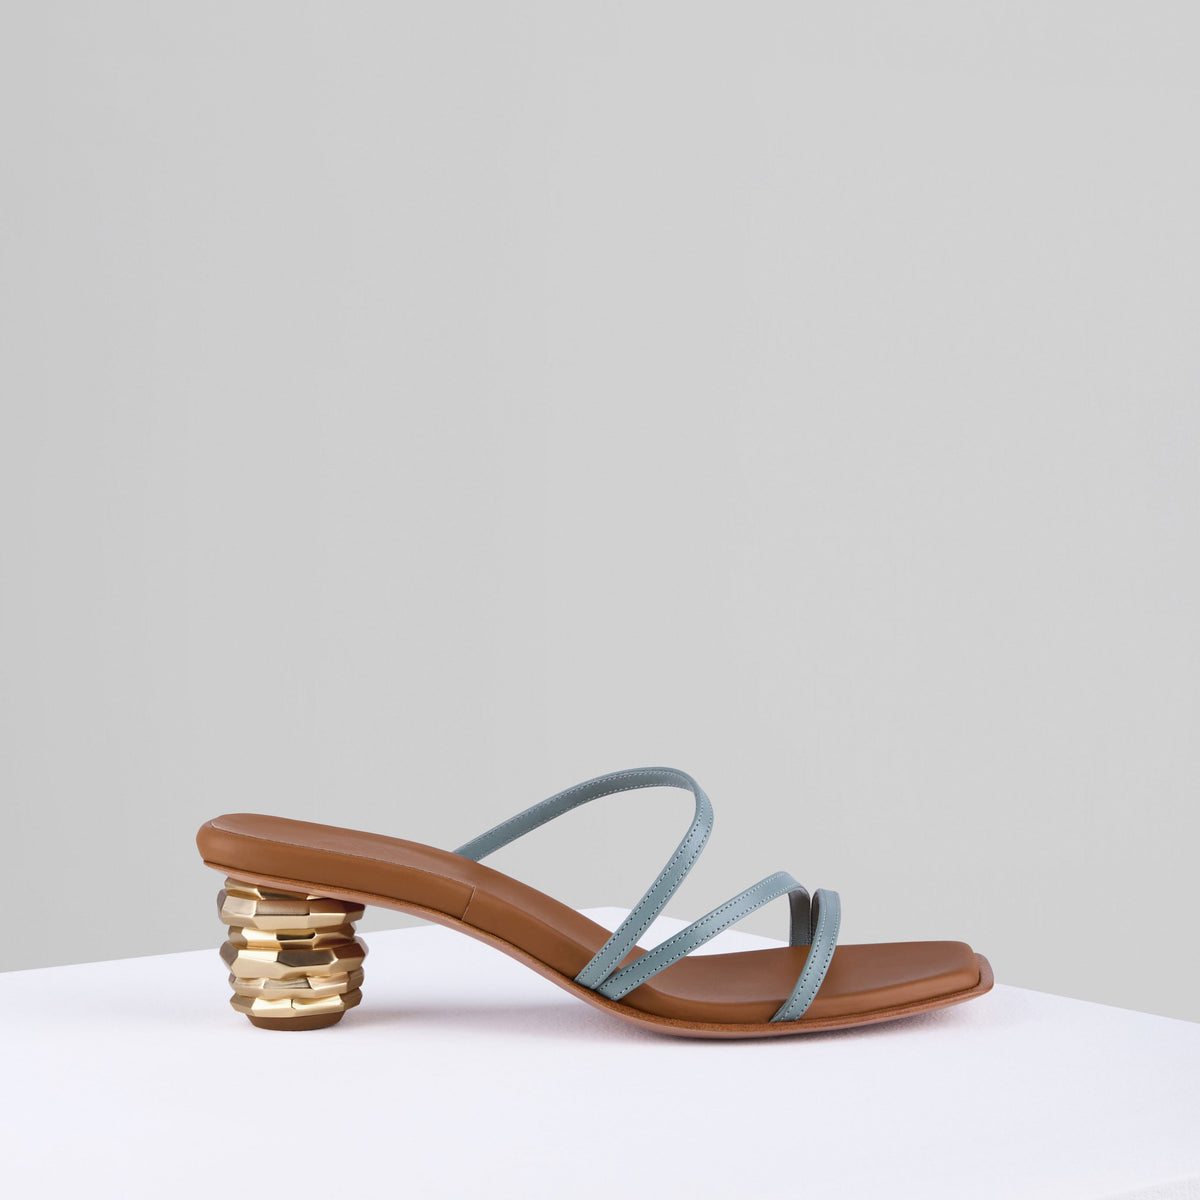 Load image into Gallery viewer, Gemma Sandals in Acqua